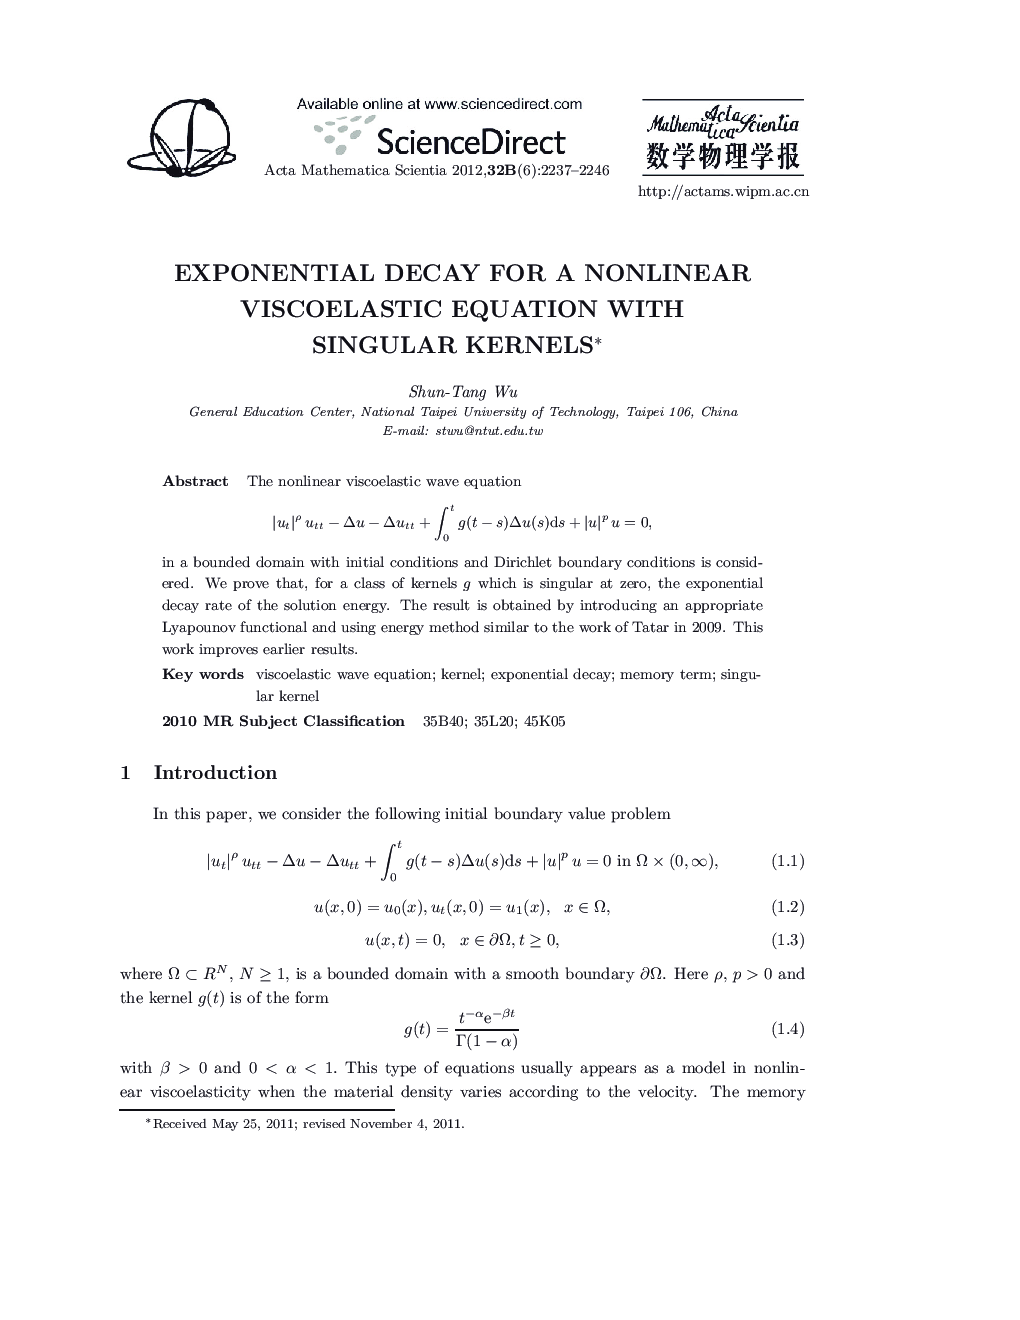 Exponential Decay for a Nonlinear Viscoelastic Equation with Singular Kernels